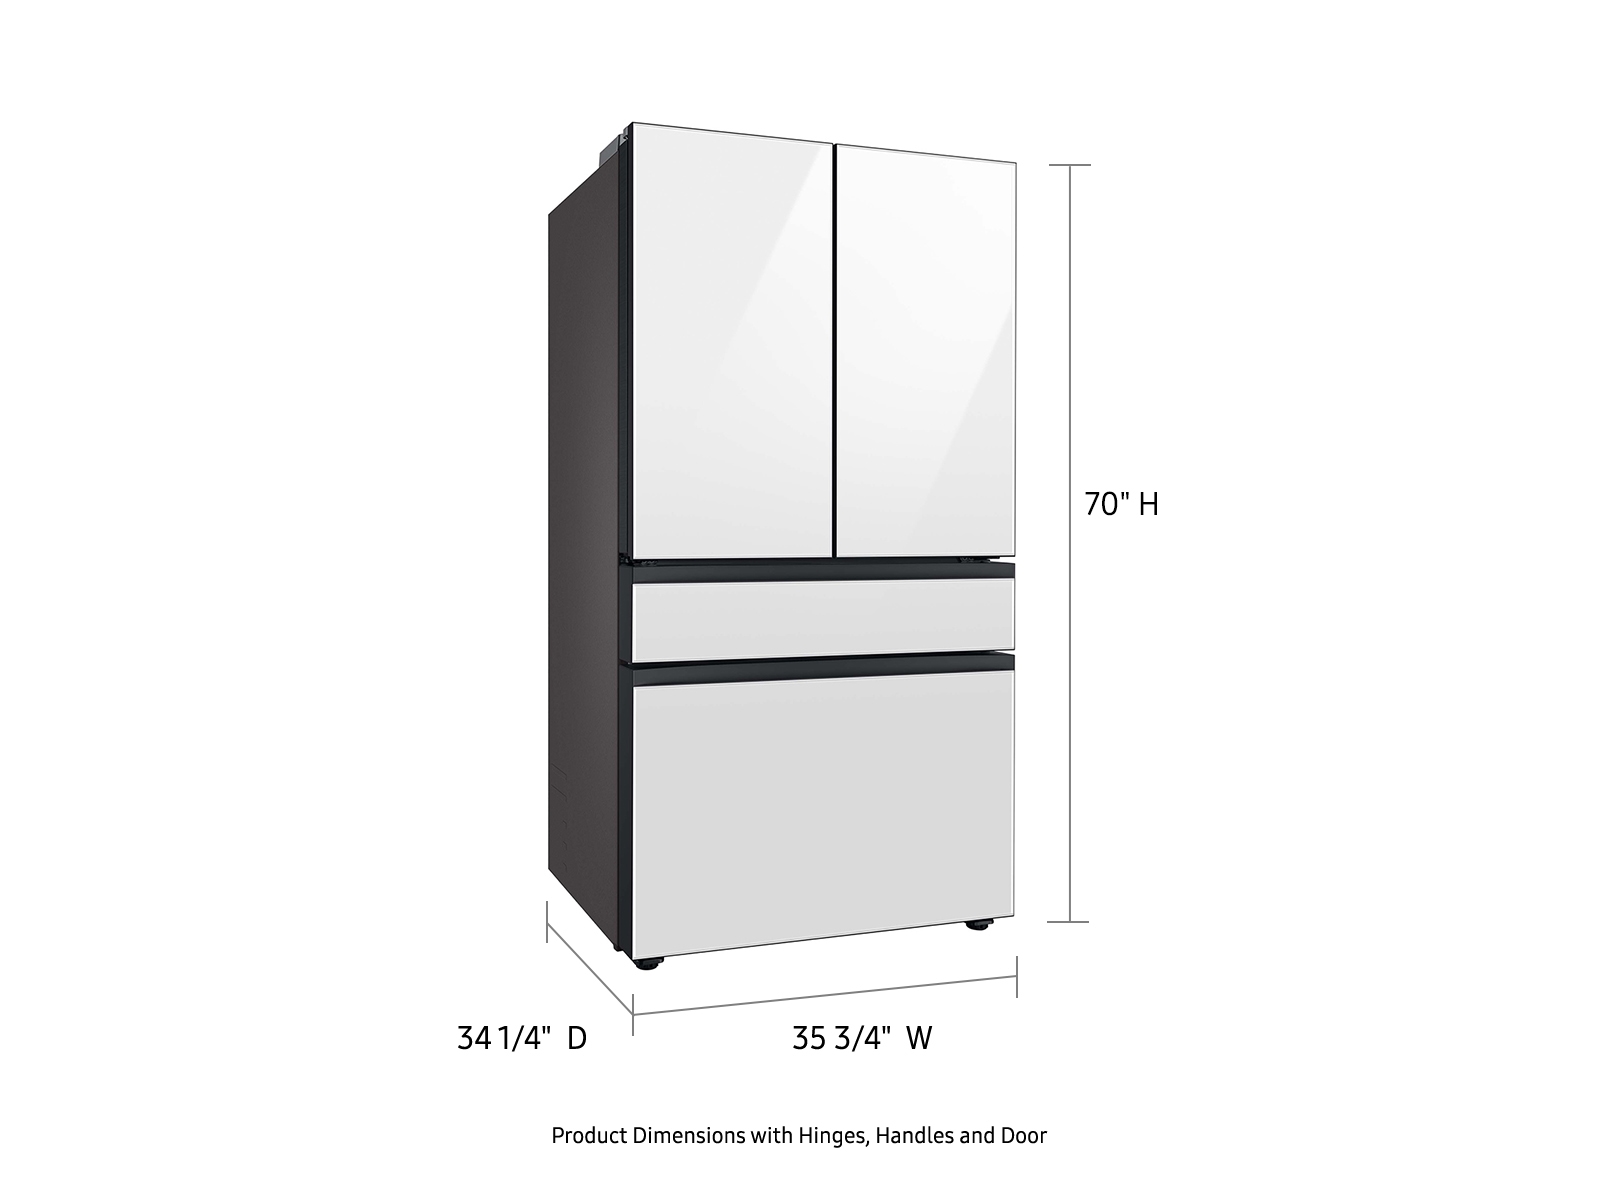 Thumbnail image of Bespoke 4-Door French Door Refrigerator (29 cu. ft.) with Beverage Center&trade; in White Glass